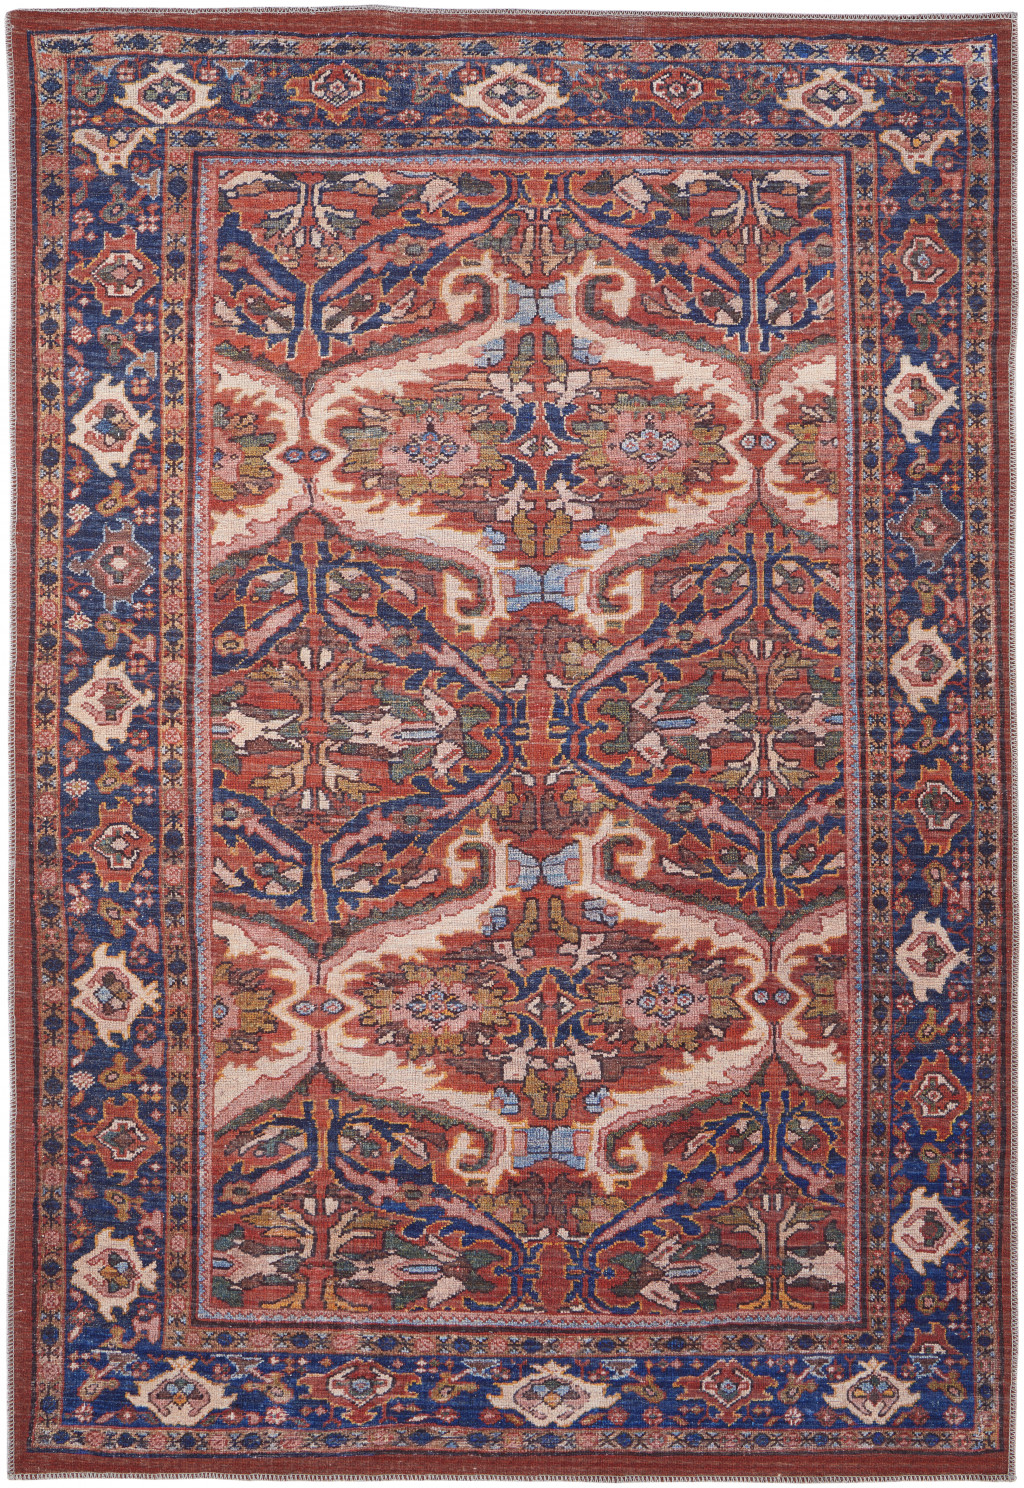 8' X 10' Red Tan And Blue Floral Power Loom Area Rug-515149-1